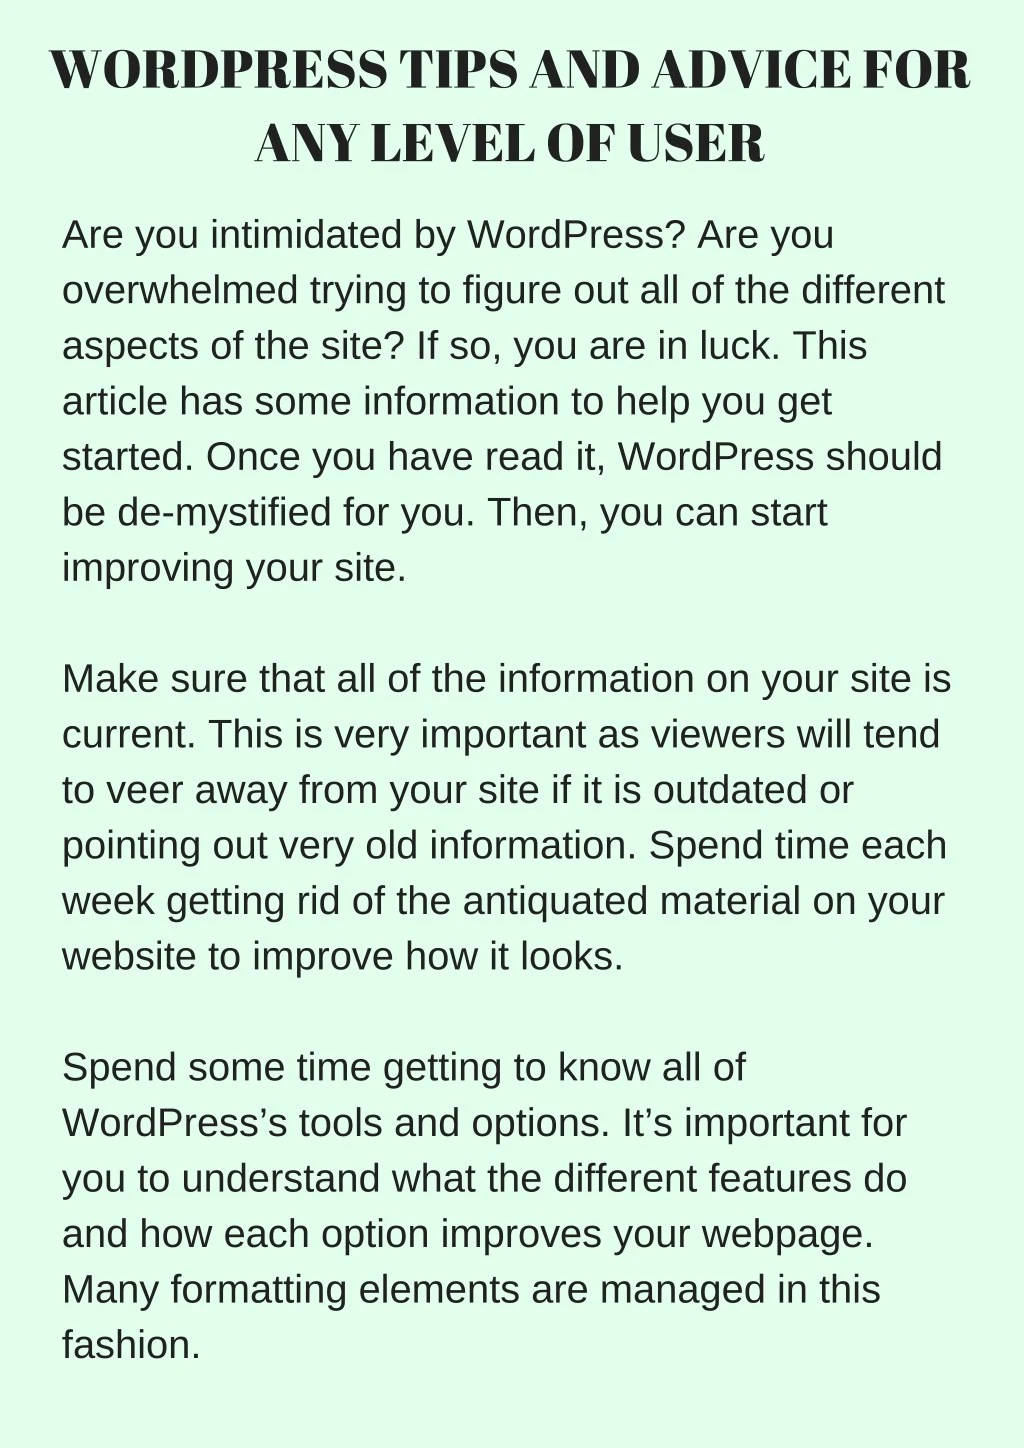 wordpress tips and advice for any level of user